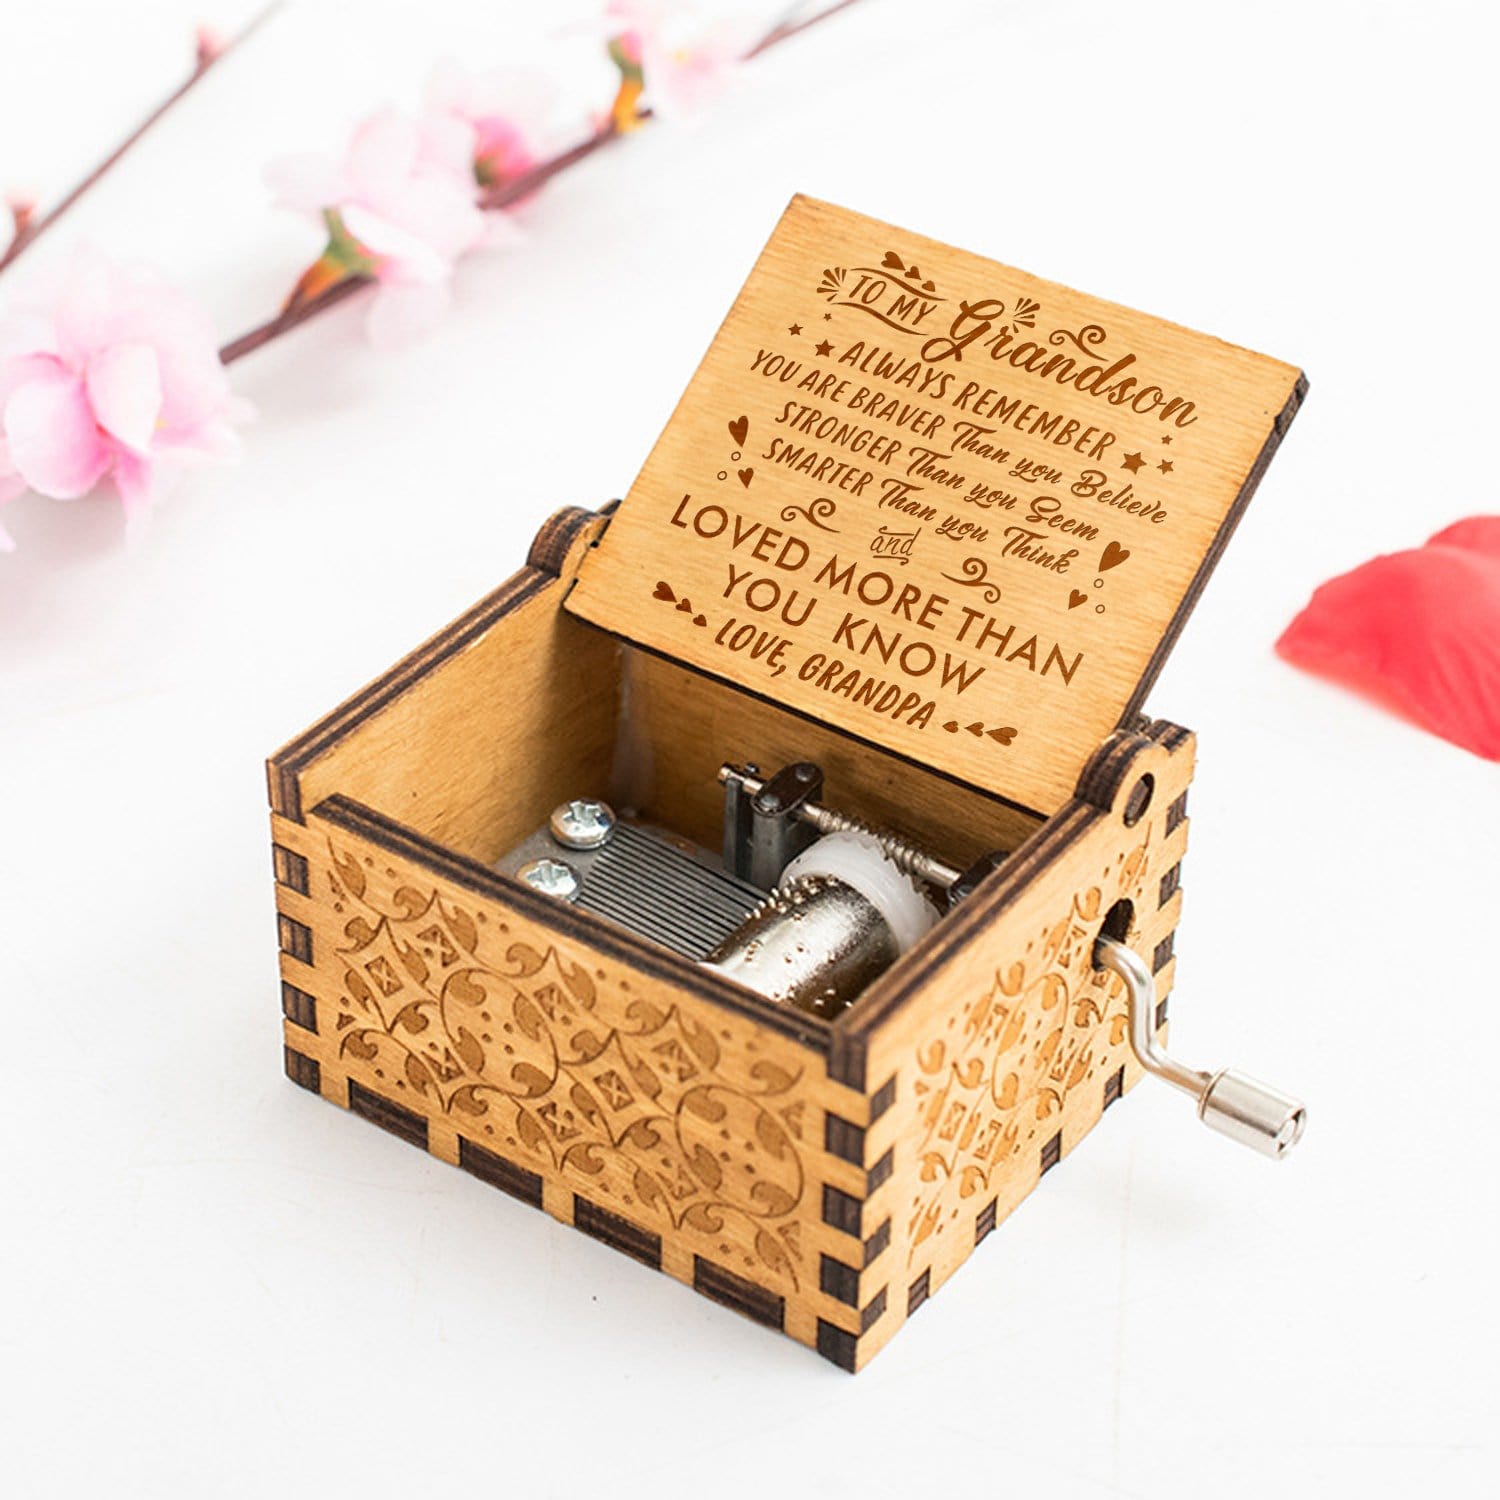 Music Box Grandpa To Grandson You Are Loved More Than You Know Engraved Wooden Music Box GiveMe-Gifts